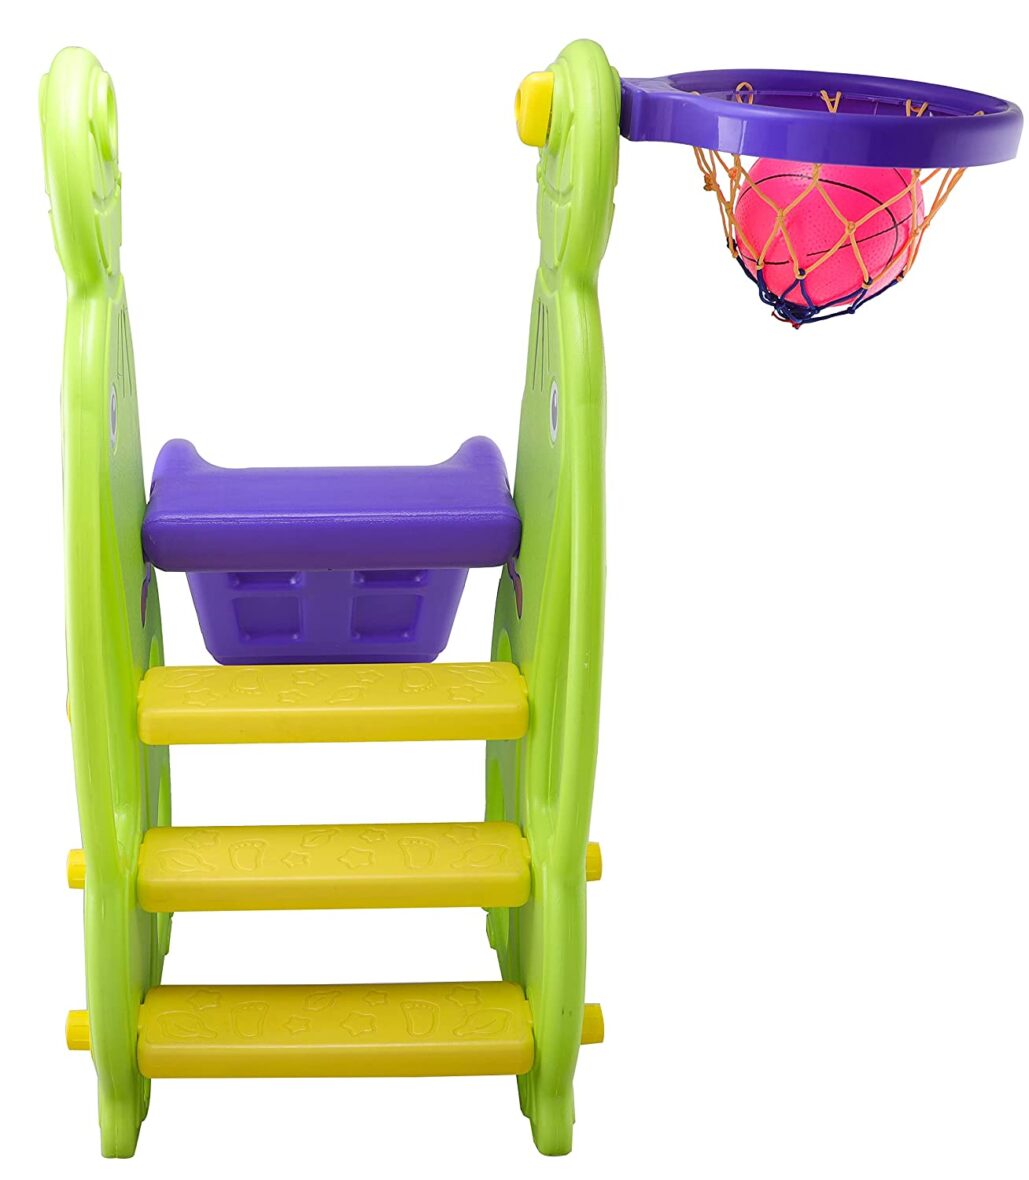 Dolphin Slide Along with One Basket Ball for Kids – Easy to Assemble and Use – Unbreakable Plastic – Indoor and Outdoor Use – Age 1 to 7 Years